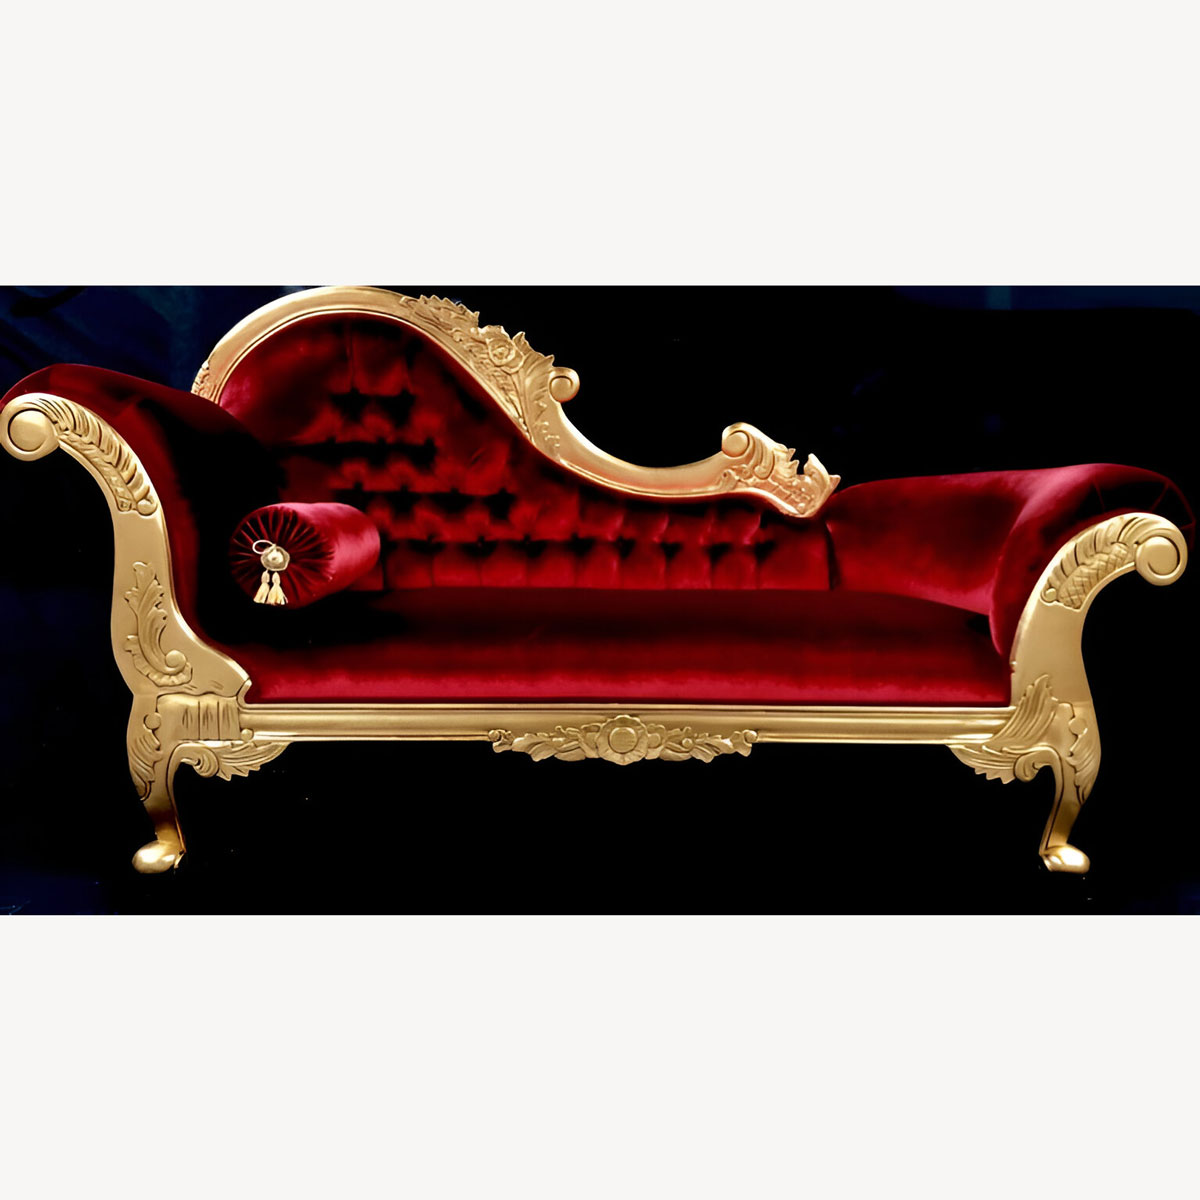 Beautiful Chaise Gold Leaf Frame With Red Velvet Fabric Medium Size 1 - Hampshire Barn Interiors - Beautiful Chaise Gold Leaf Frame With Red Velvet Fabric Medium Size -